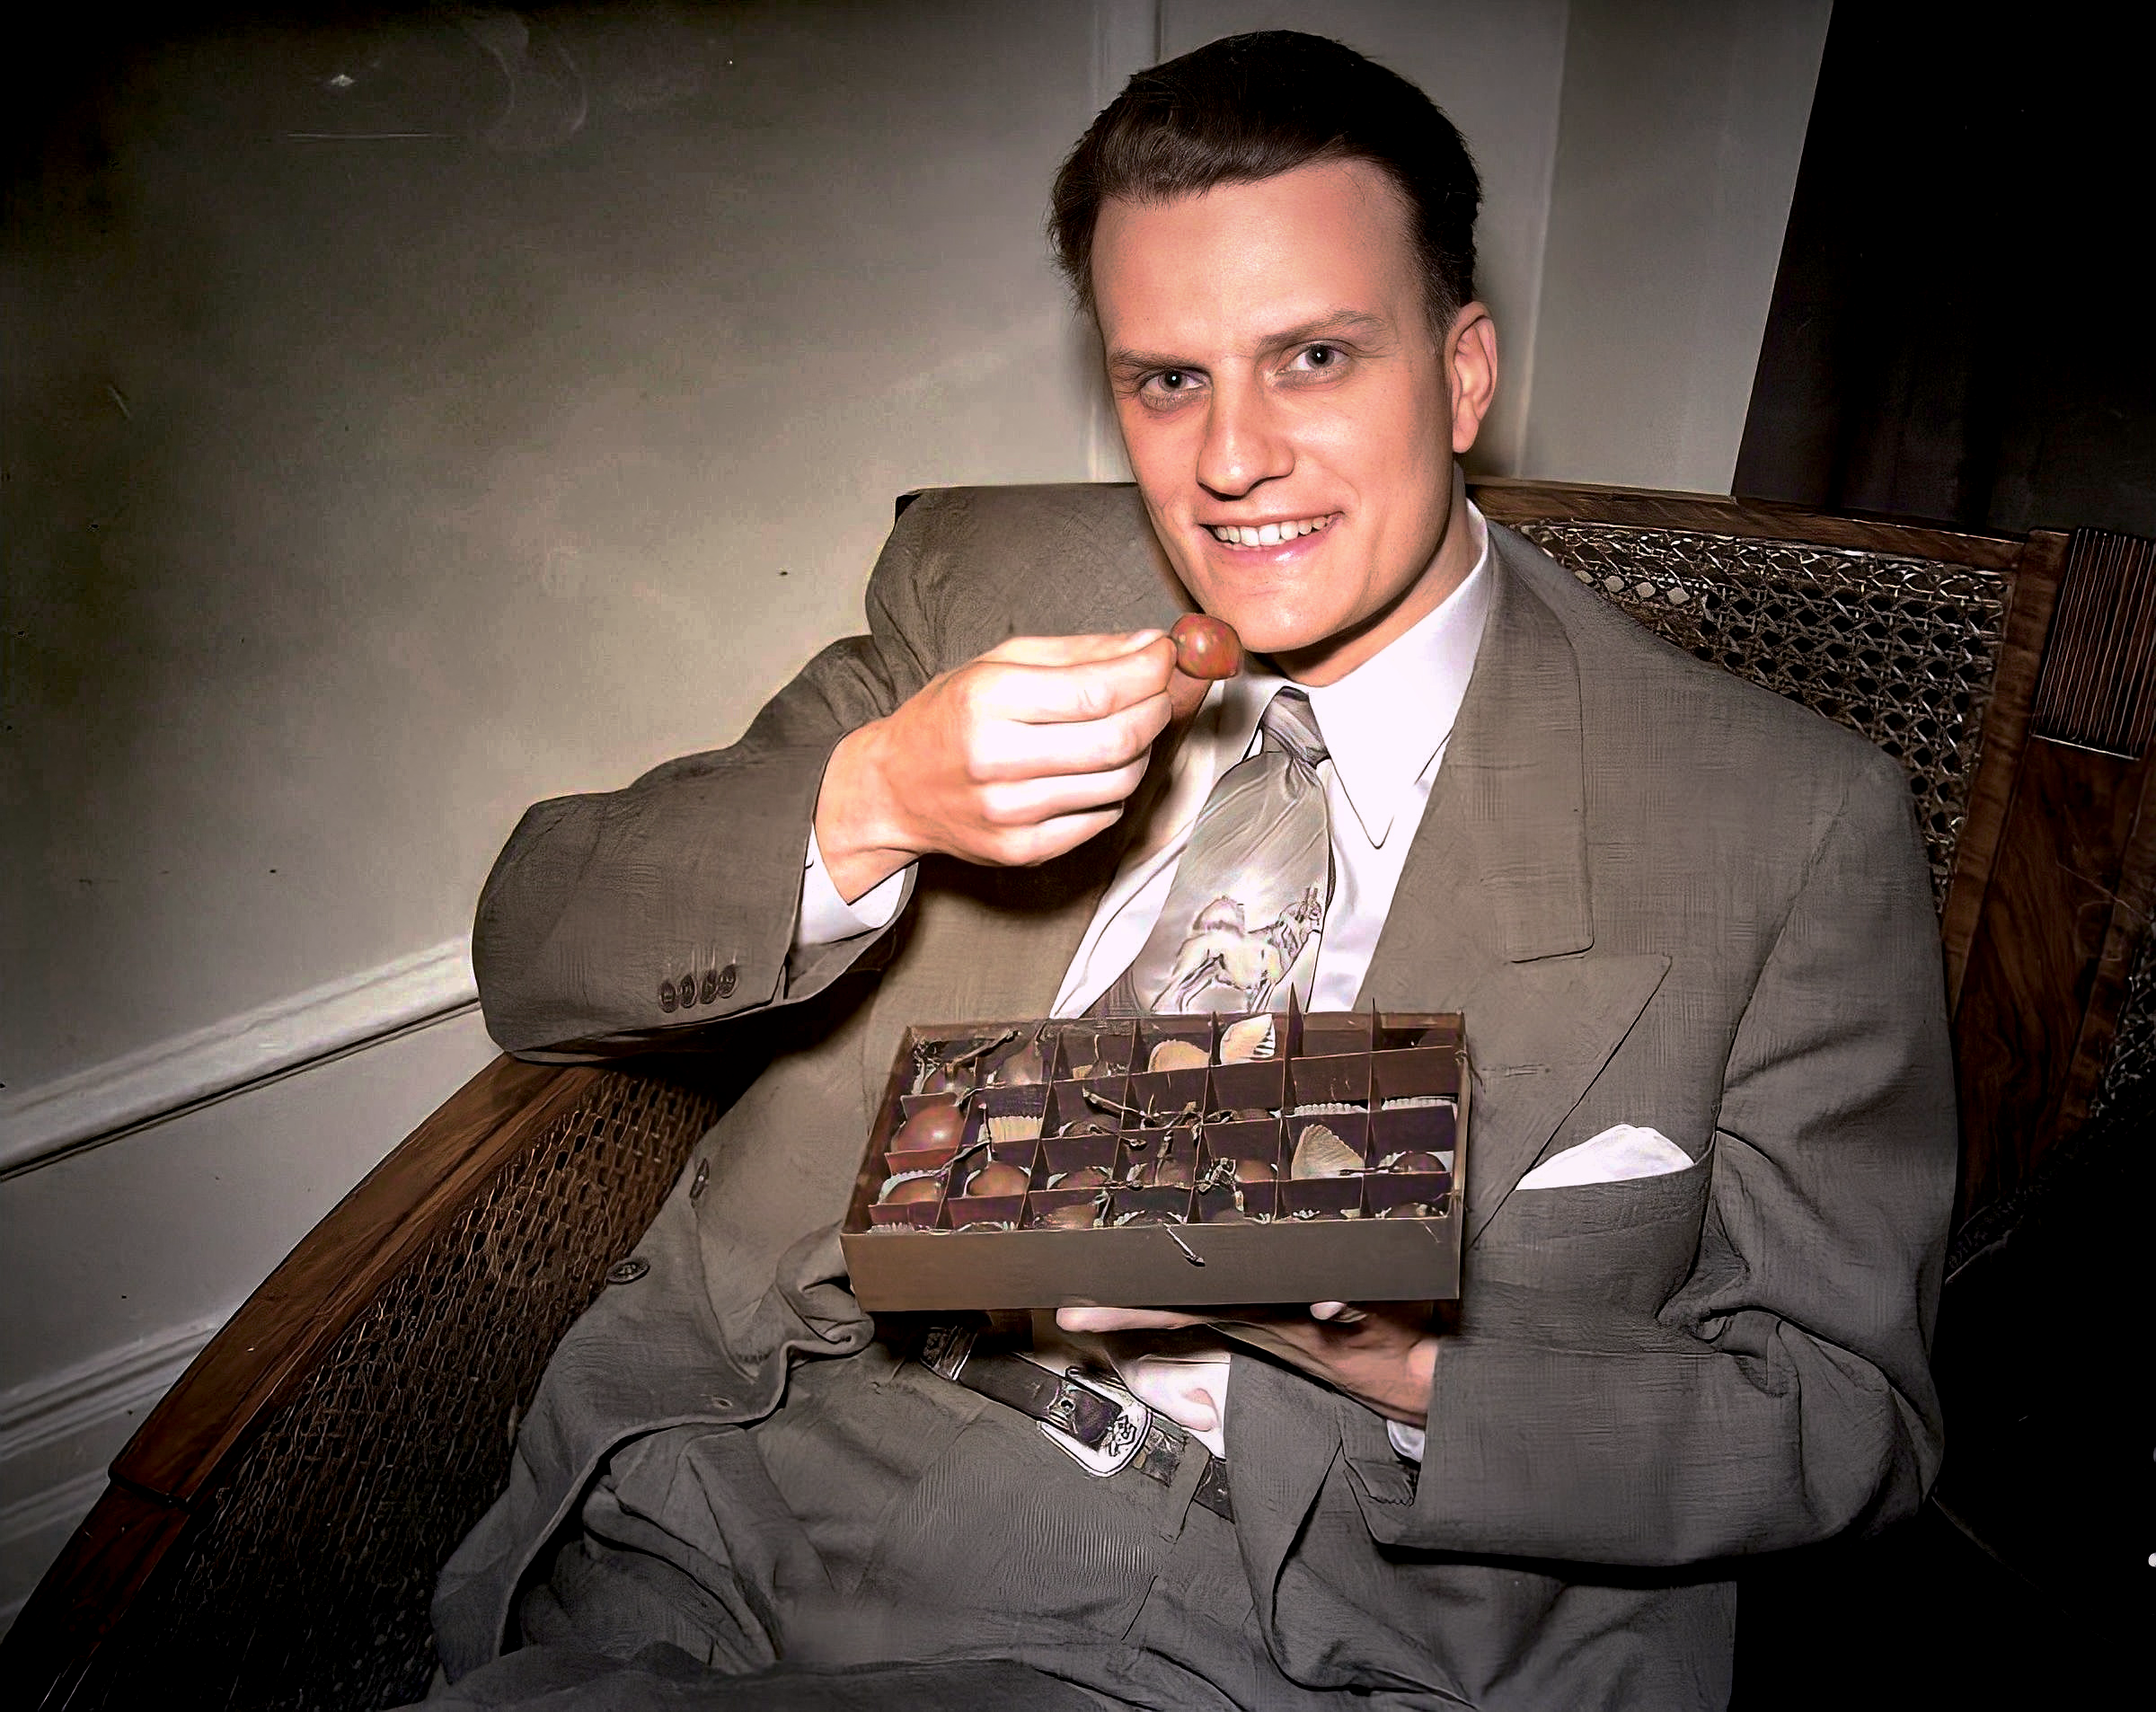 Did Billy Graham have sex with prostitutes? by Jonathan Poletti Im Jonathan image